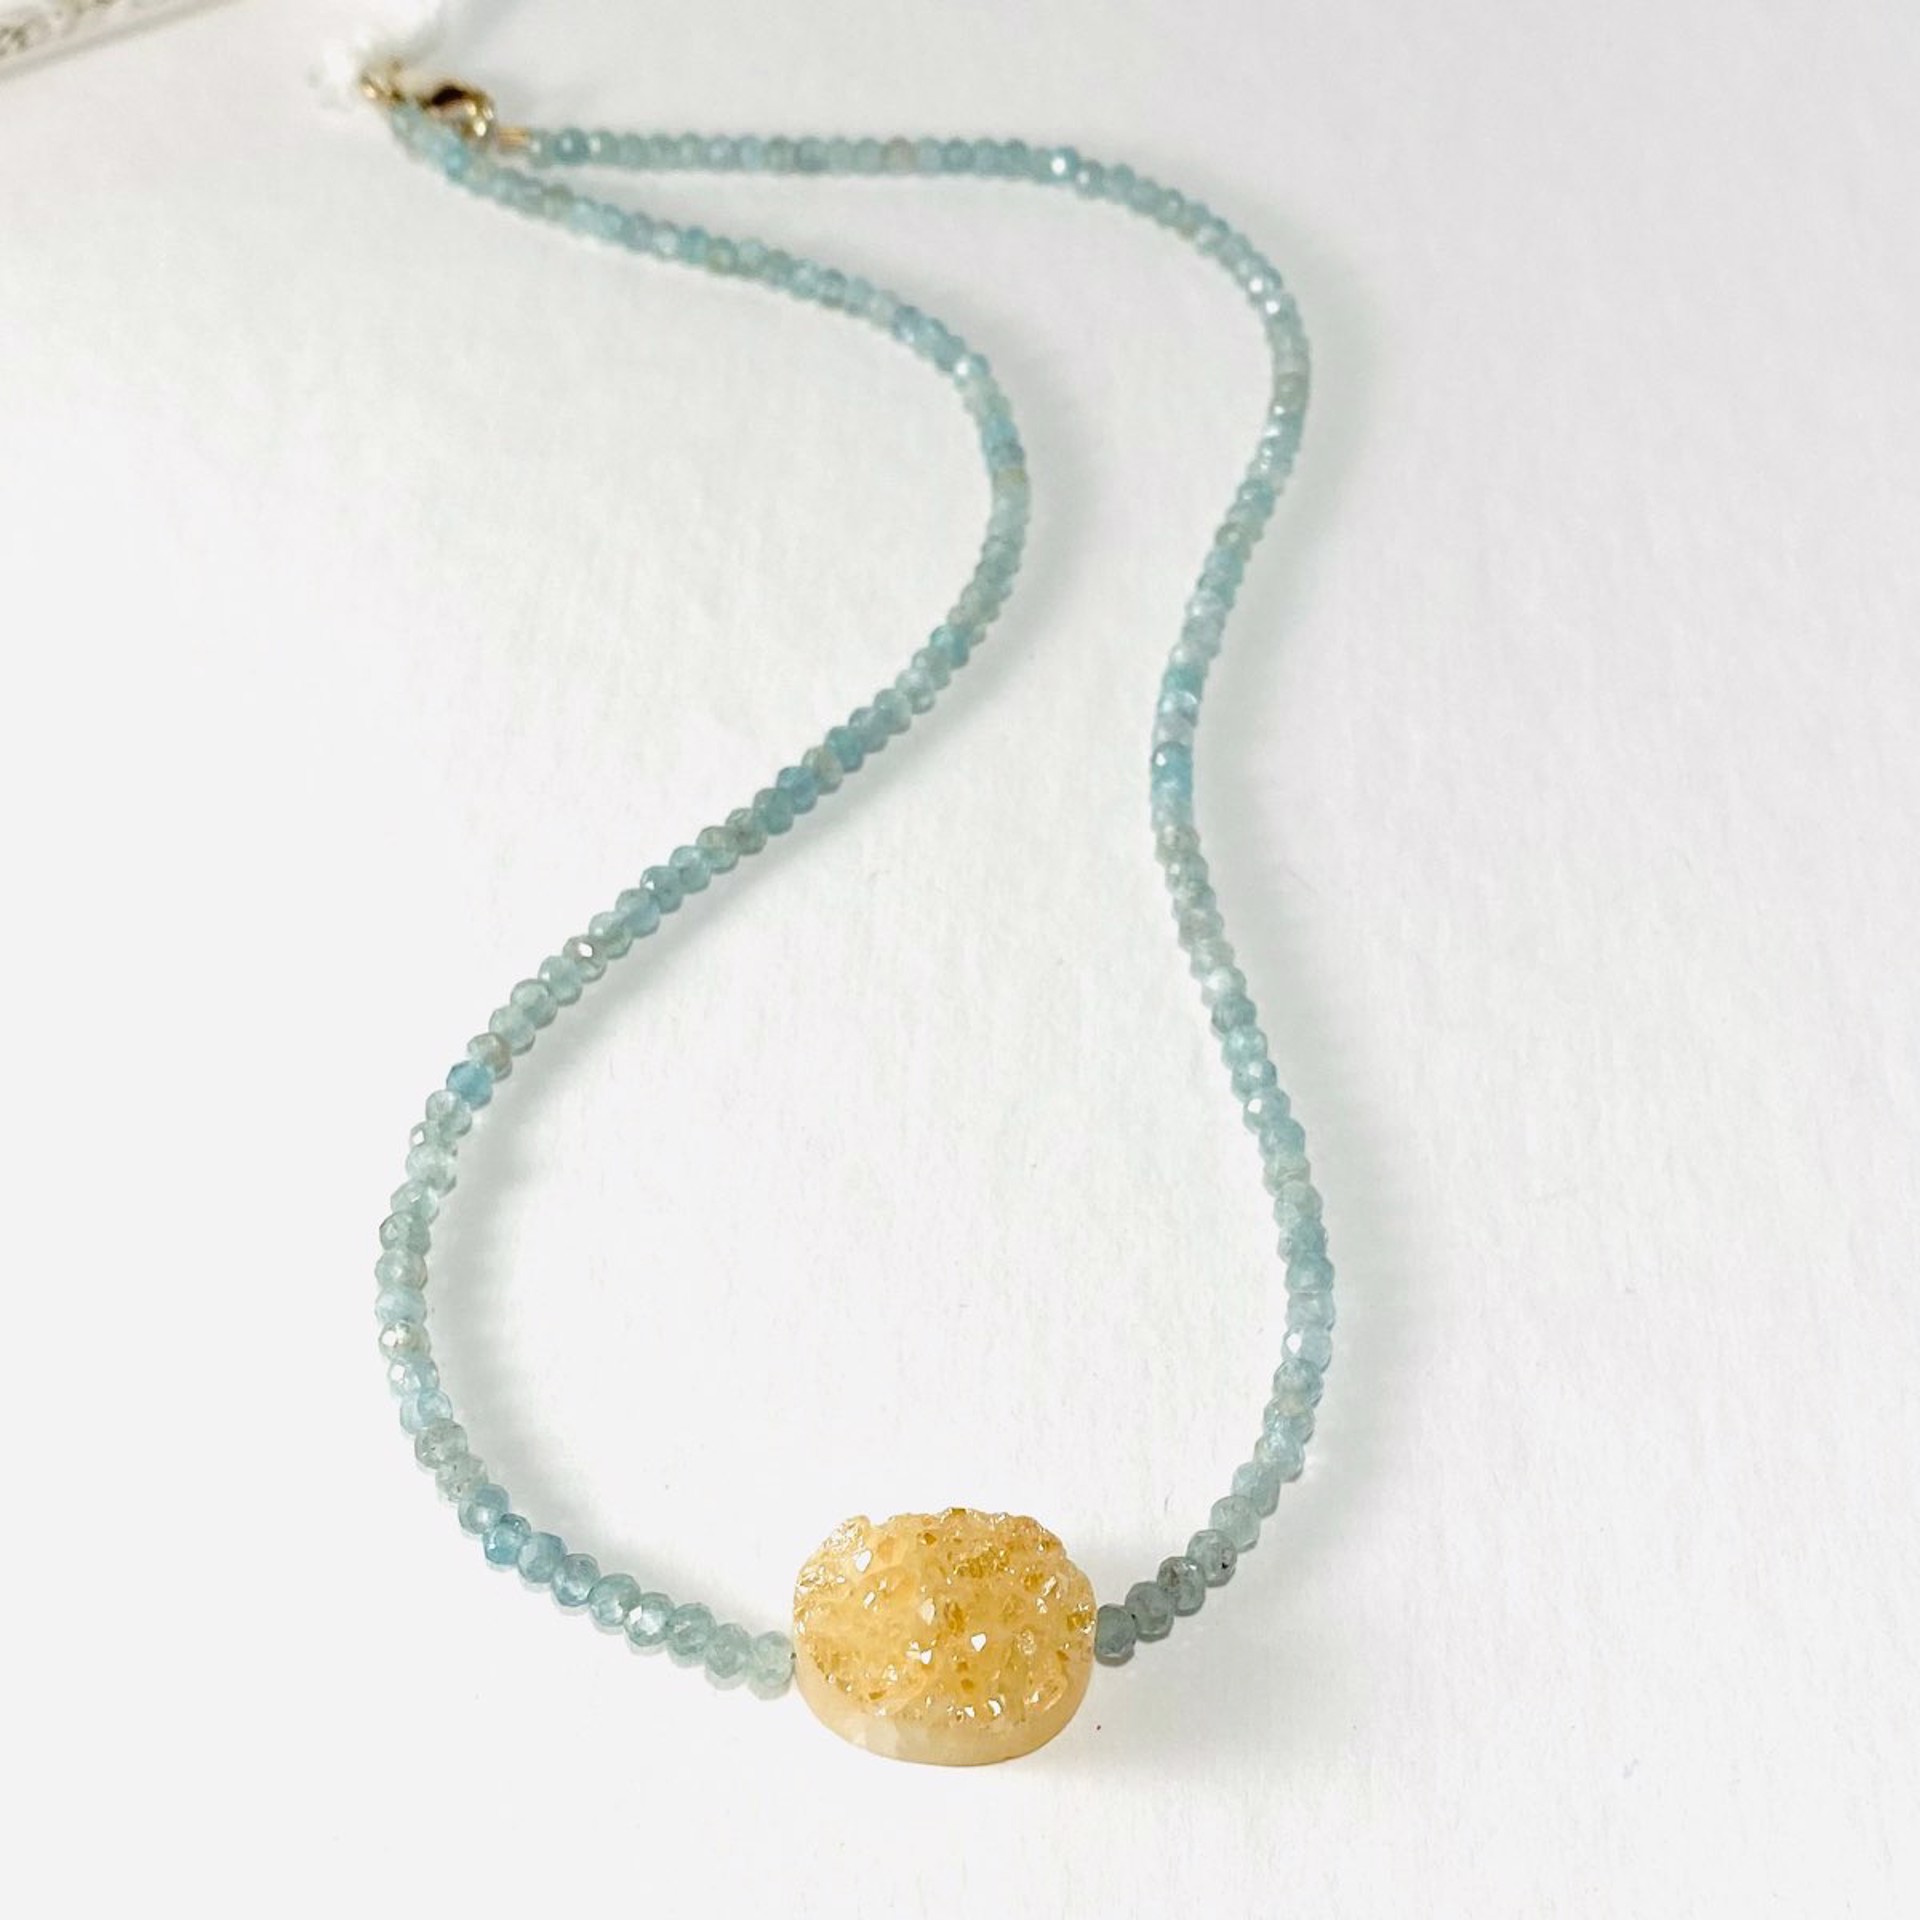 NT22-241 Faceted Aquamarine Oval Druzy Focal Necklace by Nance Trueworthy